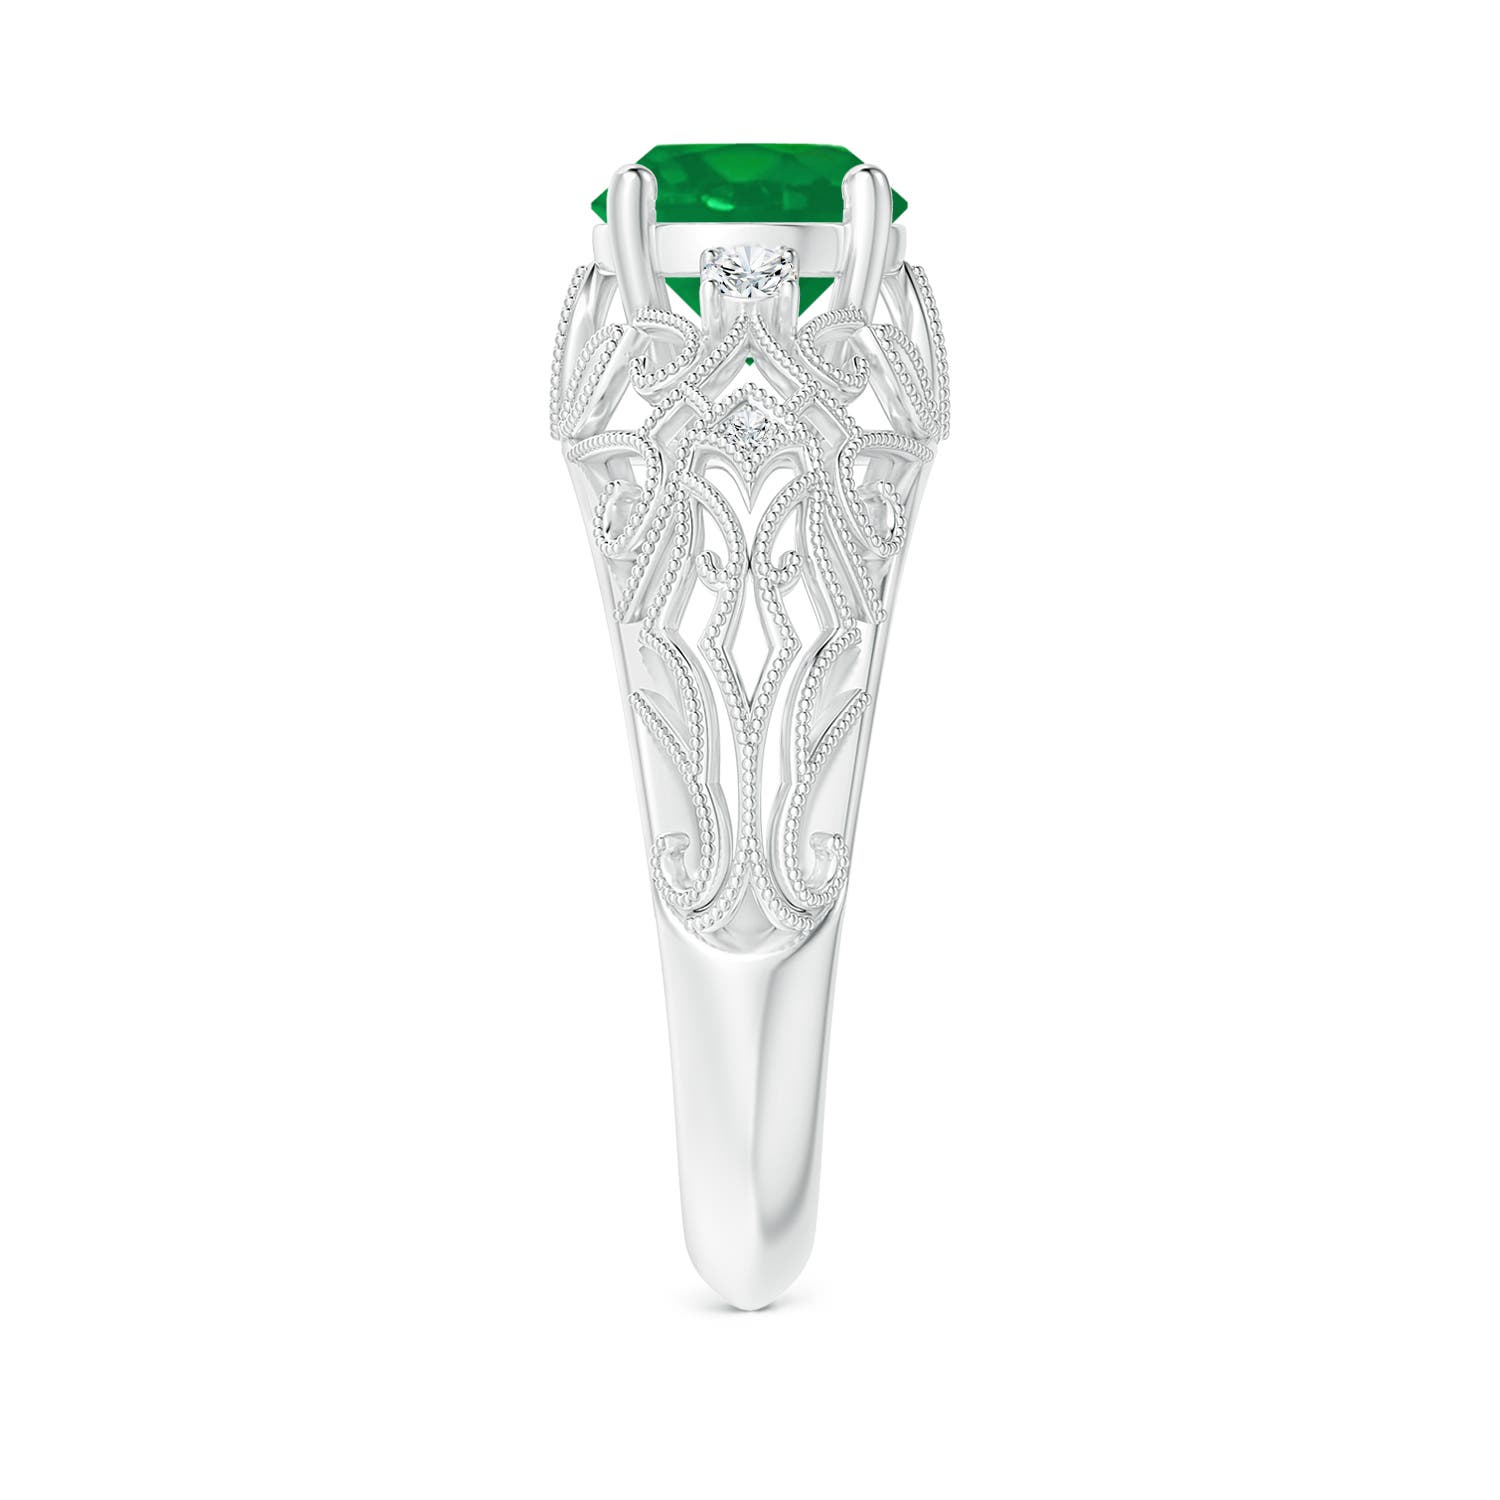 AA - Emerald / 1.3 CT / 14 KT White Gold